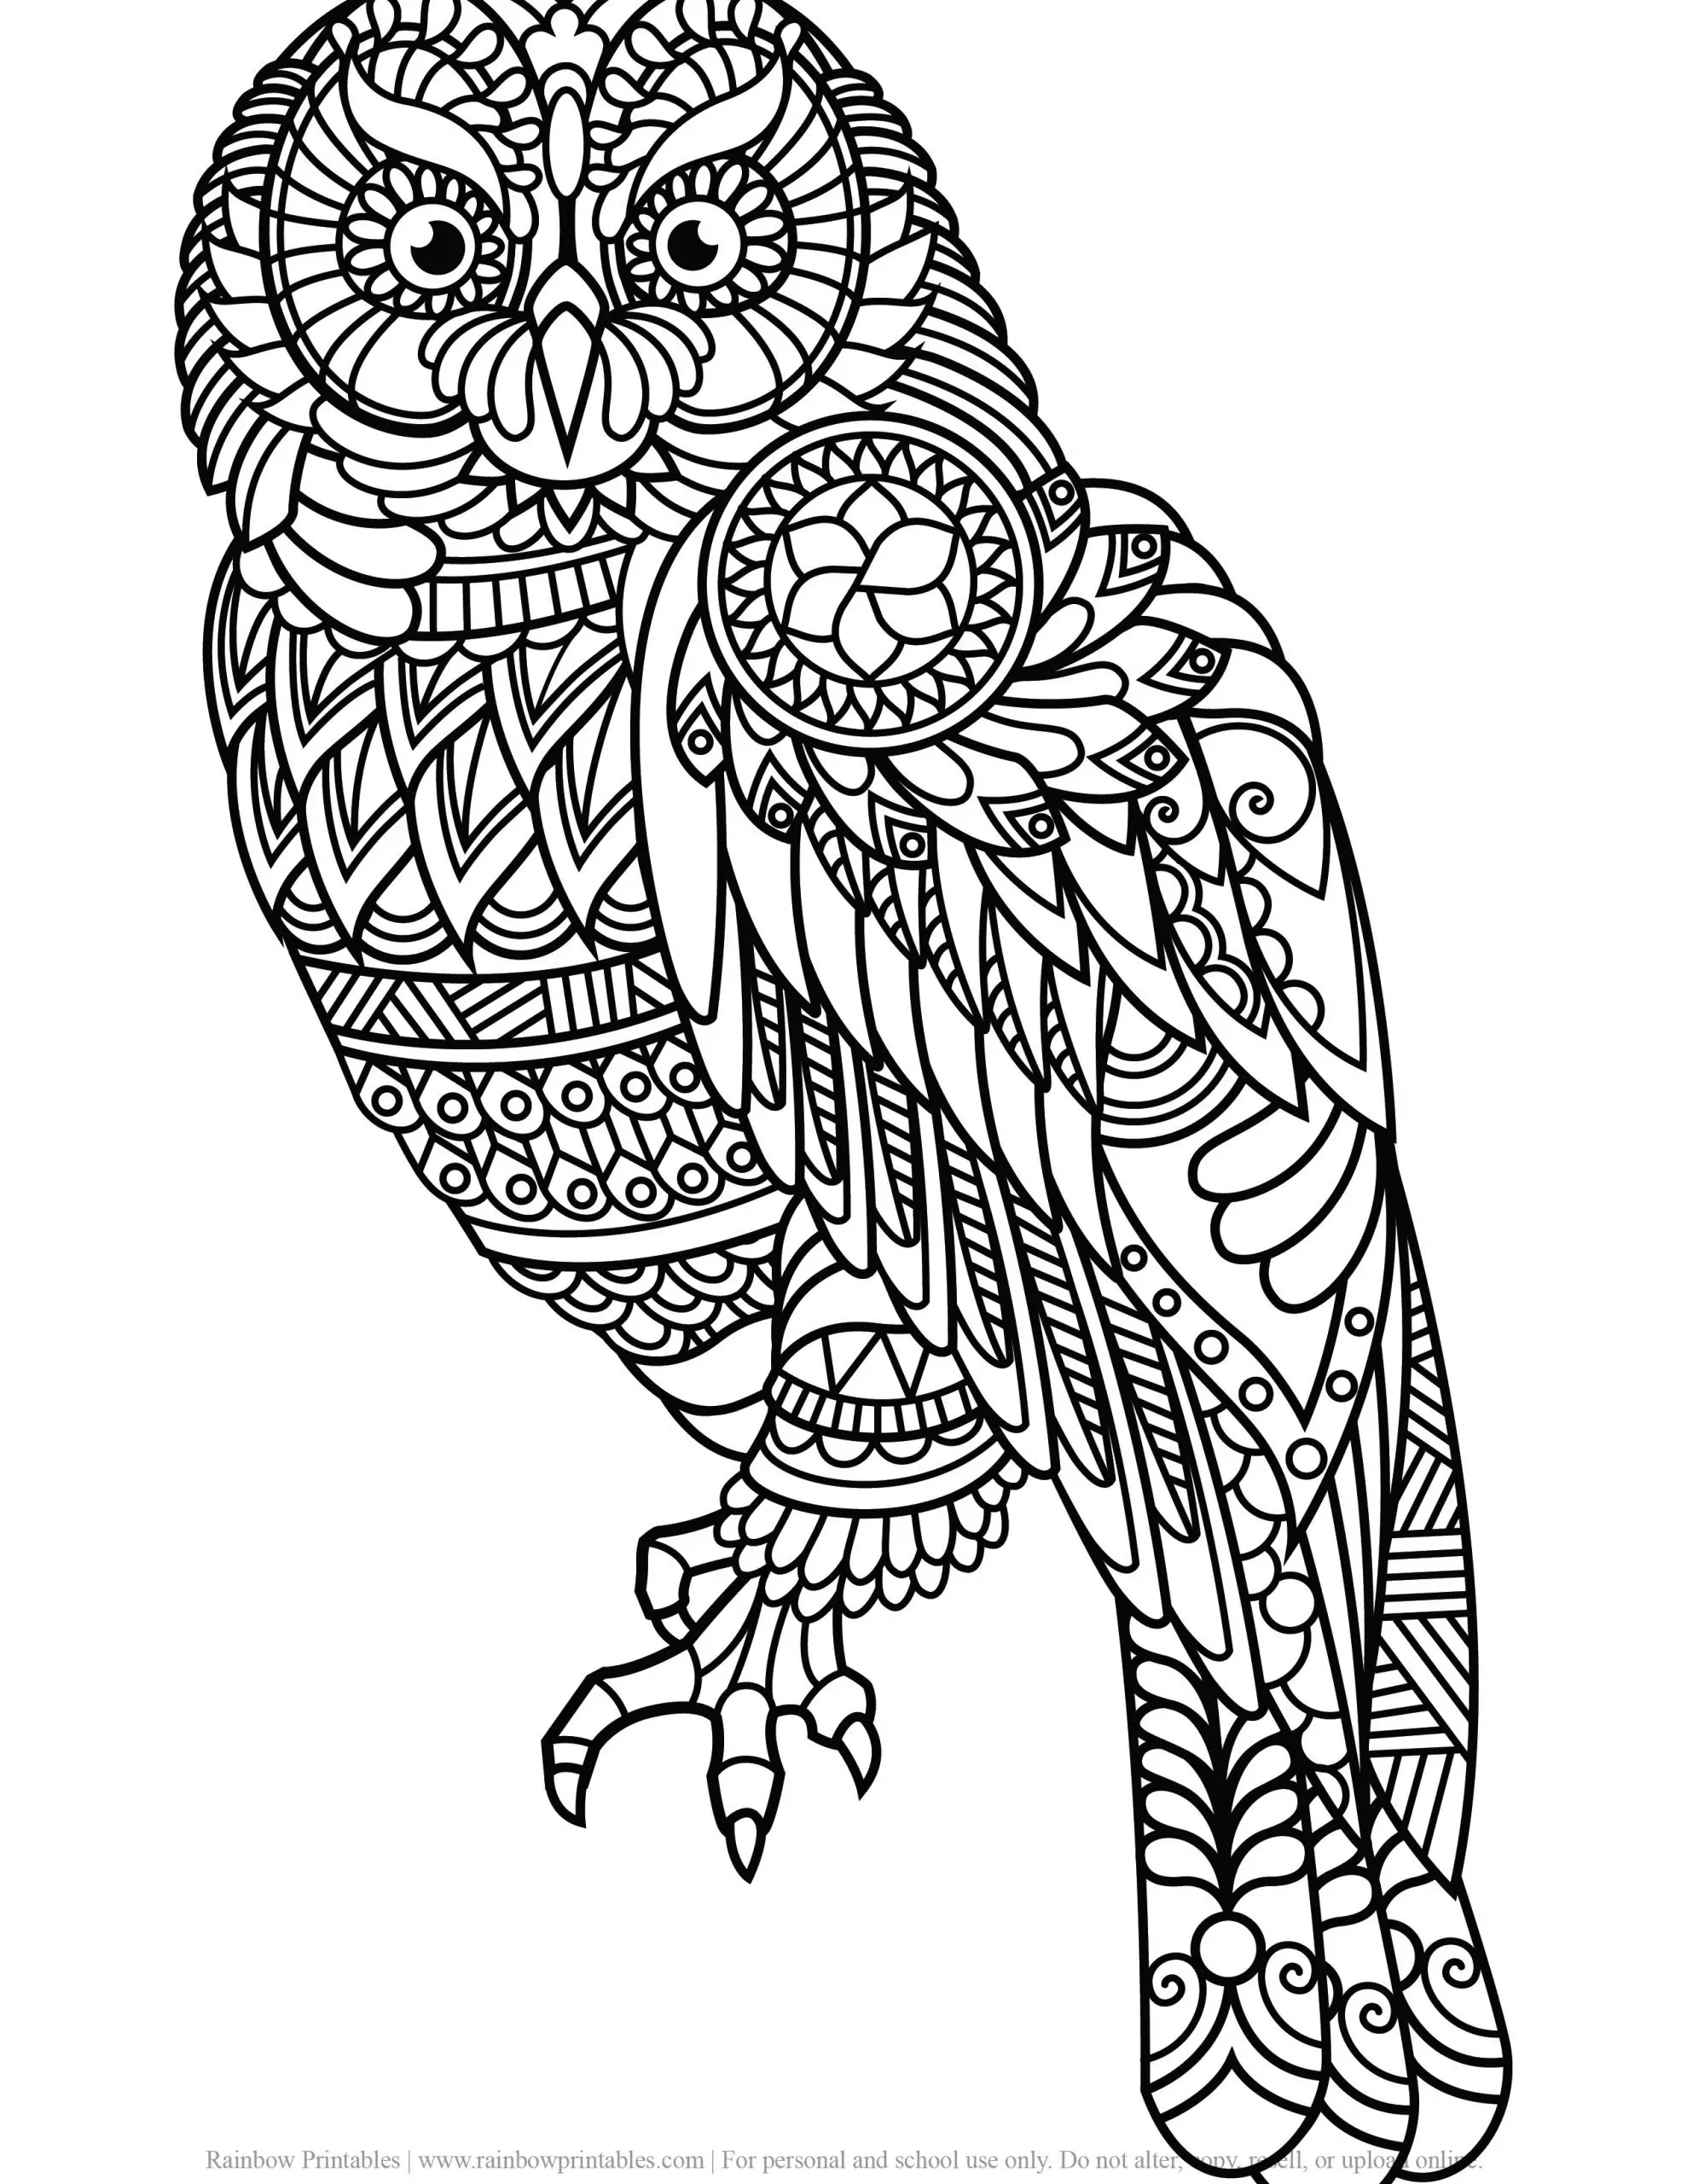 ADULT COLORING PAGES ANTI-STRESS RELIEF PRINTABLE MANDALA PATTERN GROWN UP RELAXING ACTIVITY PRINTABLE ANIMAL